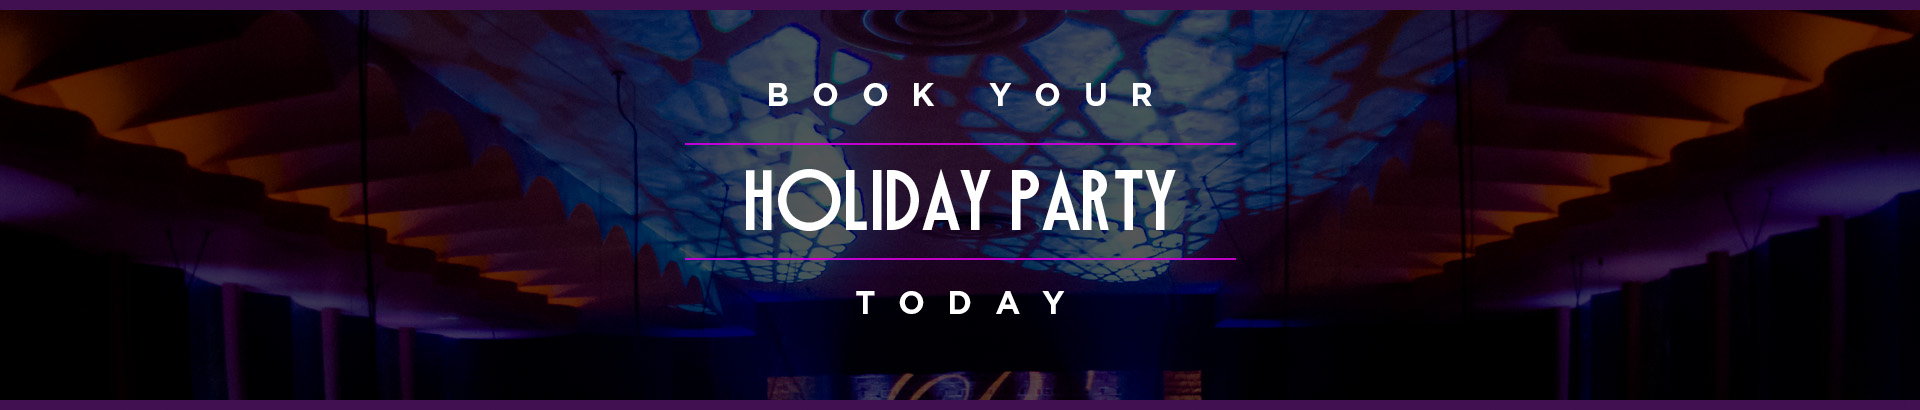 Book your holiday party today